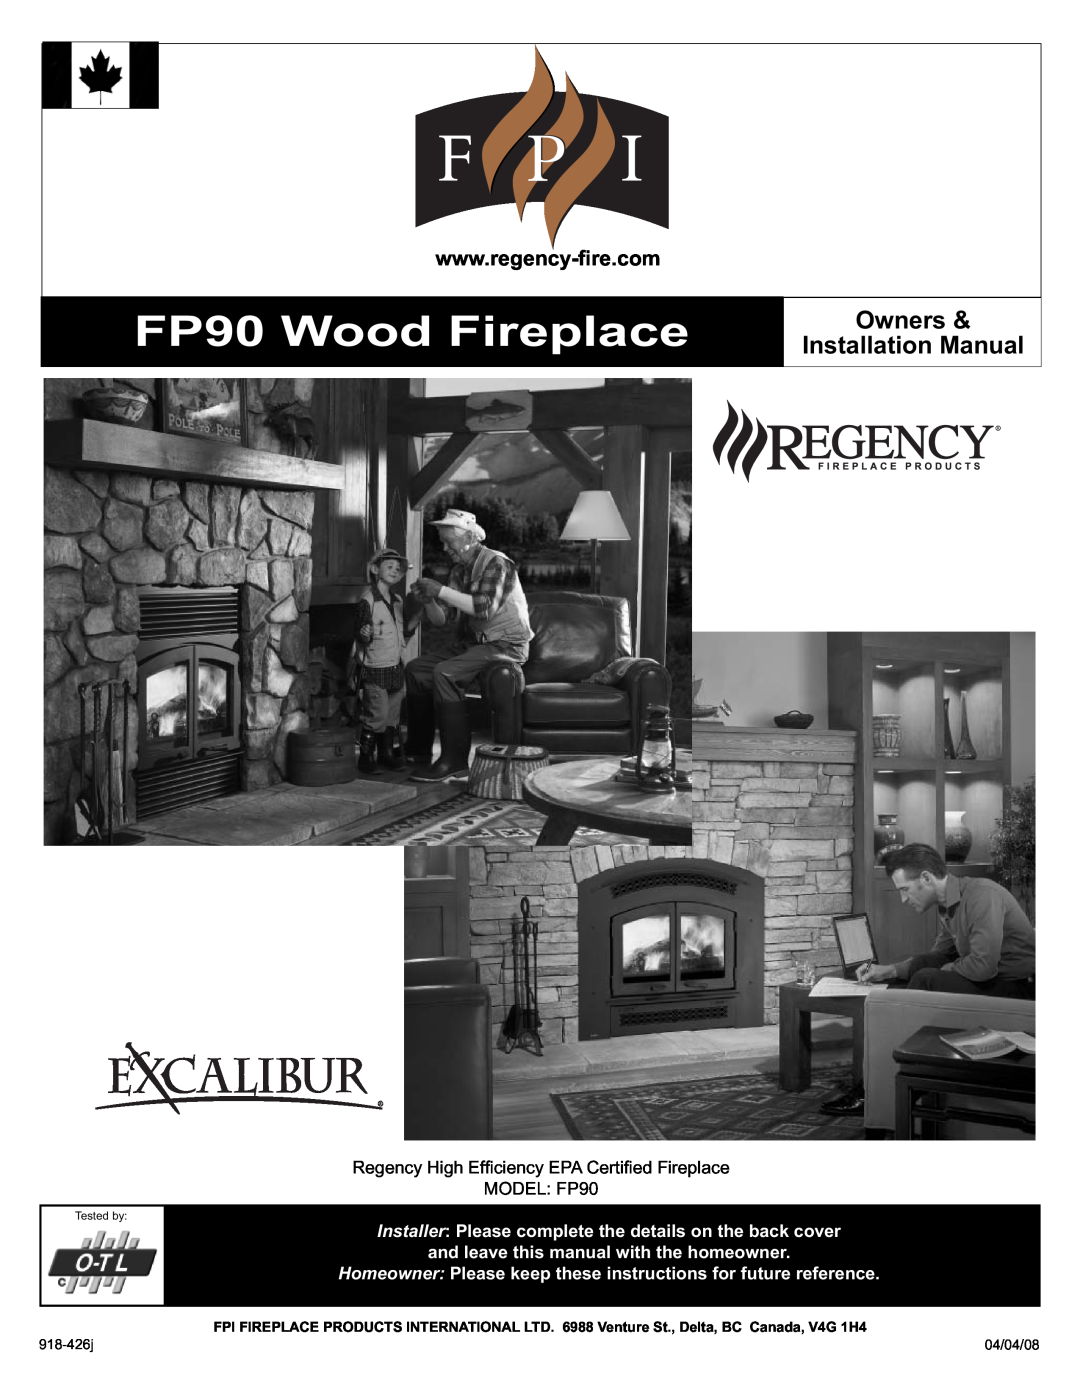 Regency installation manual FP90 Wood Fireplace, Owners & Installation Manual 